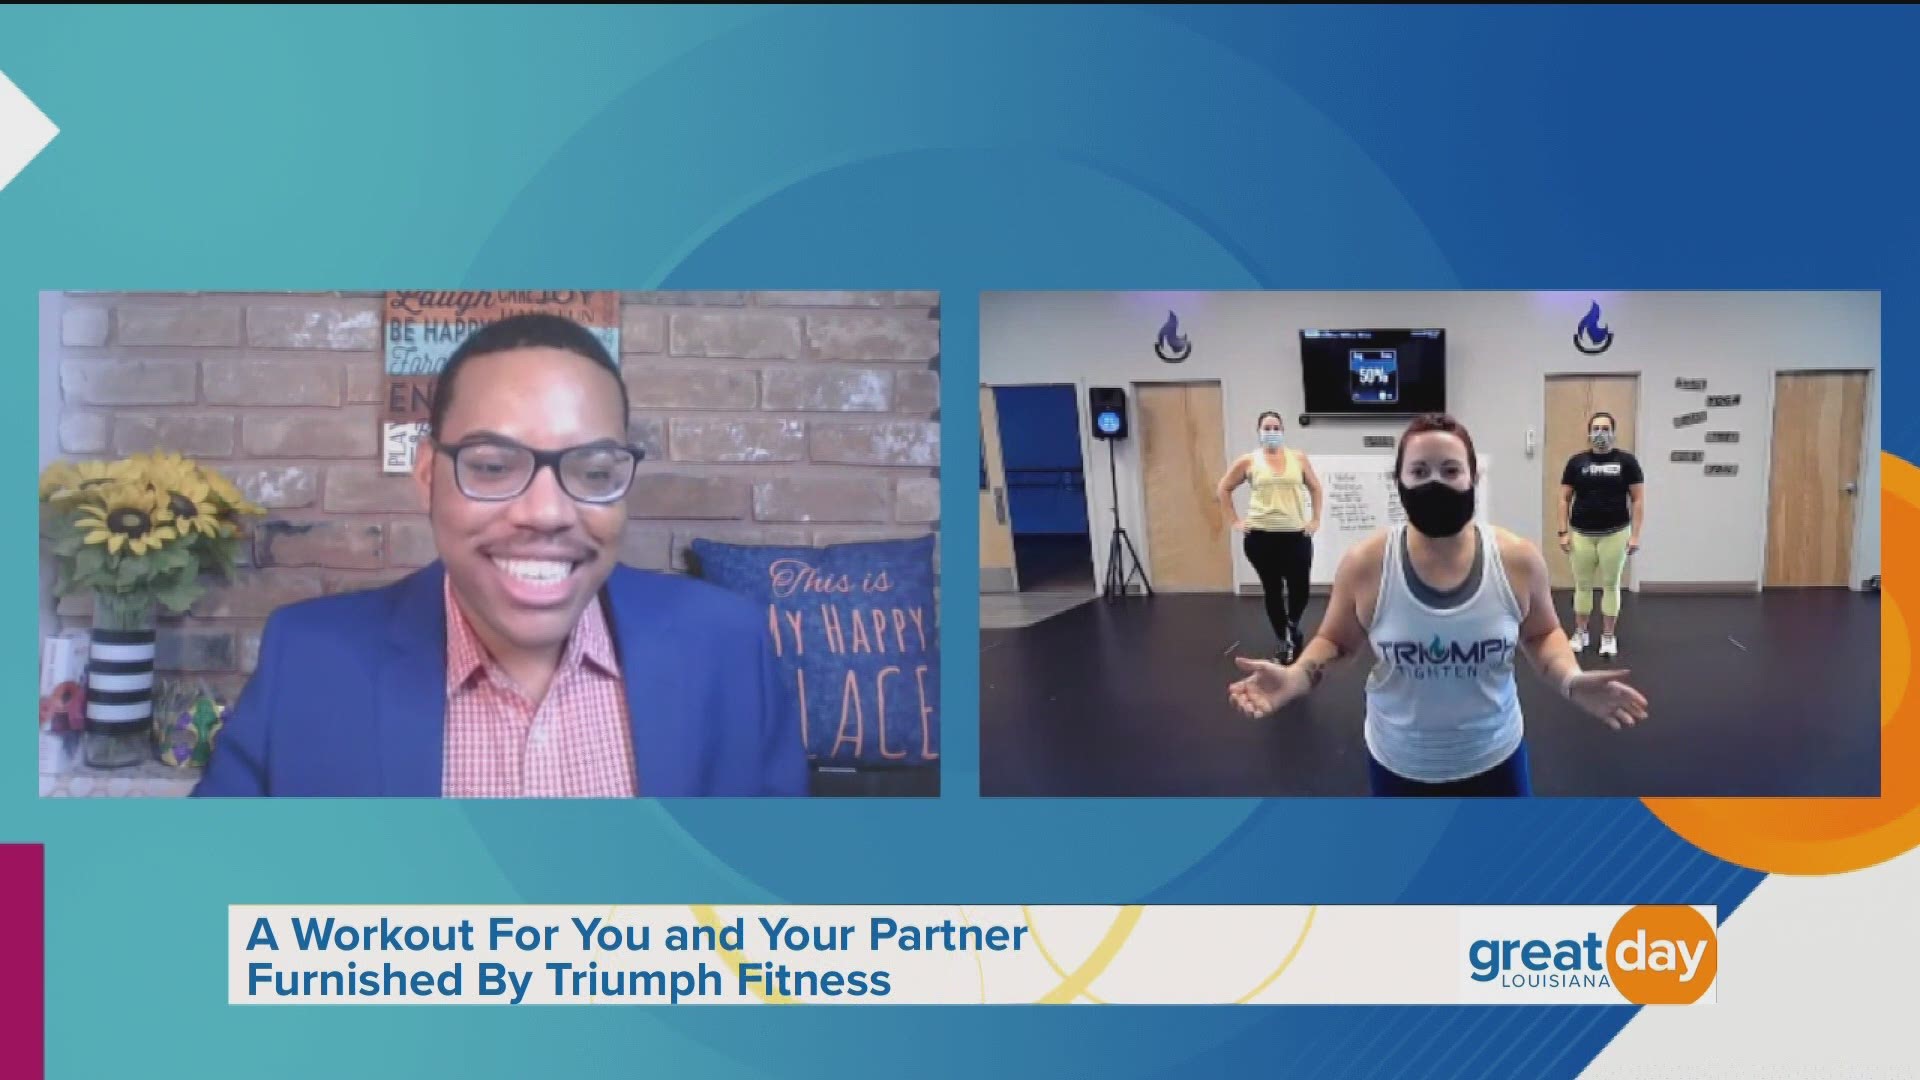 Triumph Fitness shared at-home workouts that people can do with a partner.